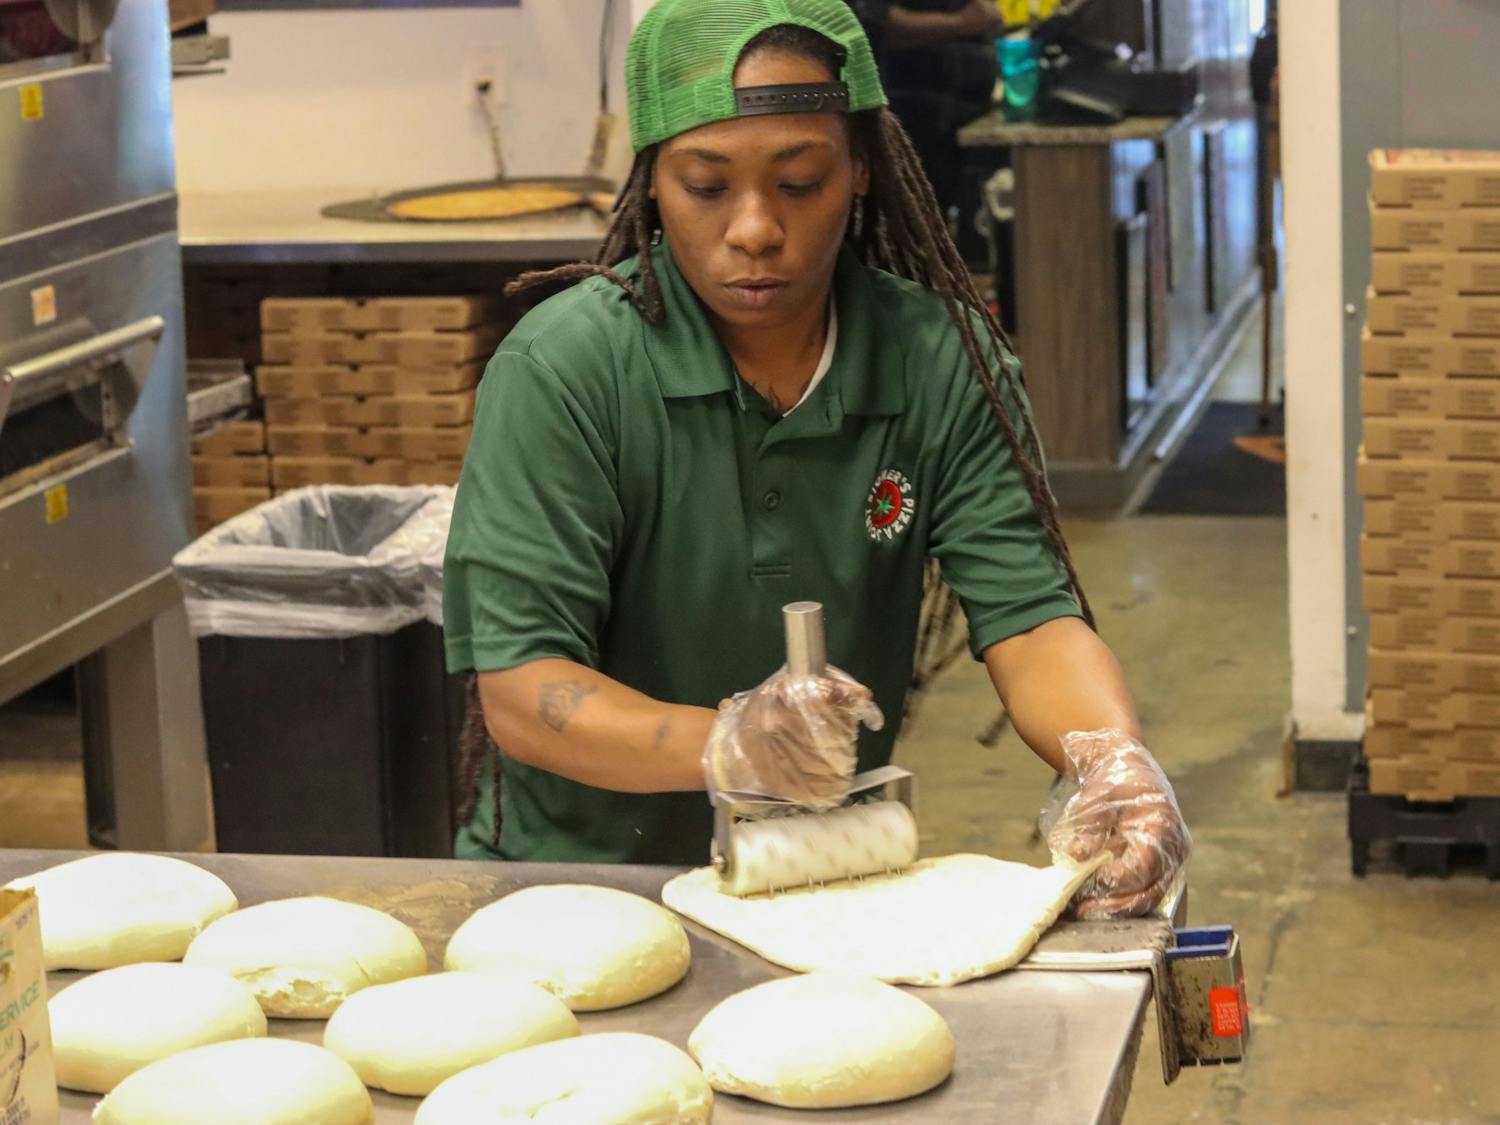 Quinotrese Johnson, a general manager at Stoner’s pizza, rolls dough on March 25, 2022. Johnson said she believes strongly in providing assistance to those in need and uses her position to help out in any way she can.